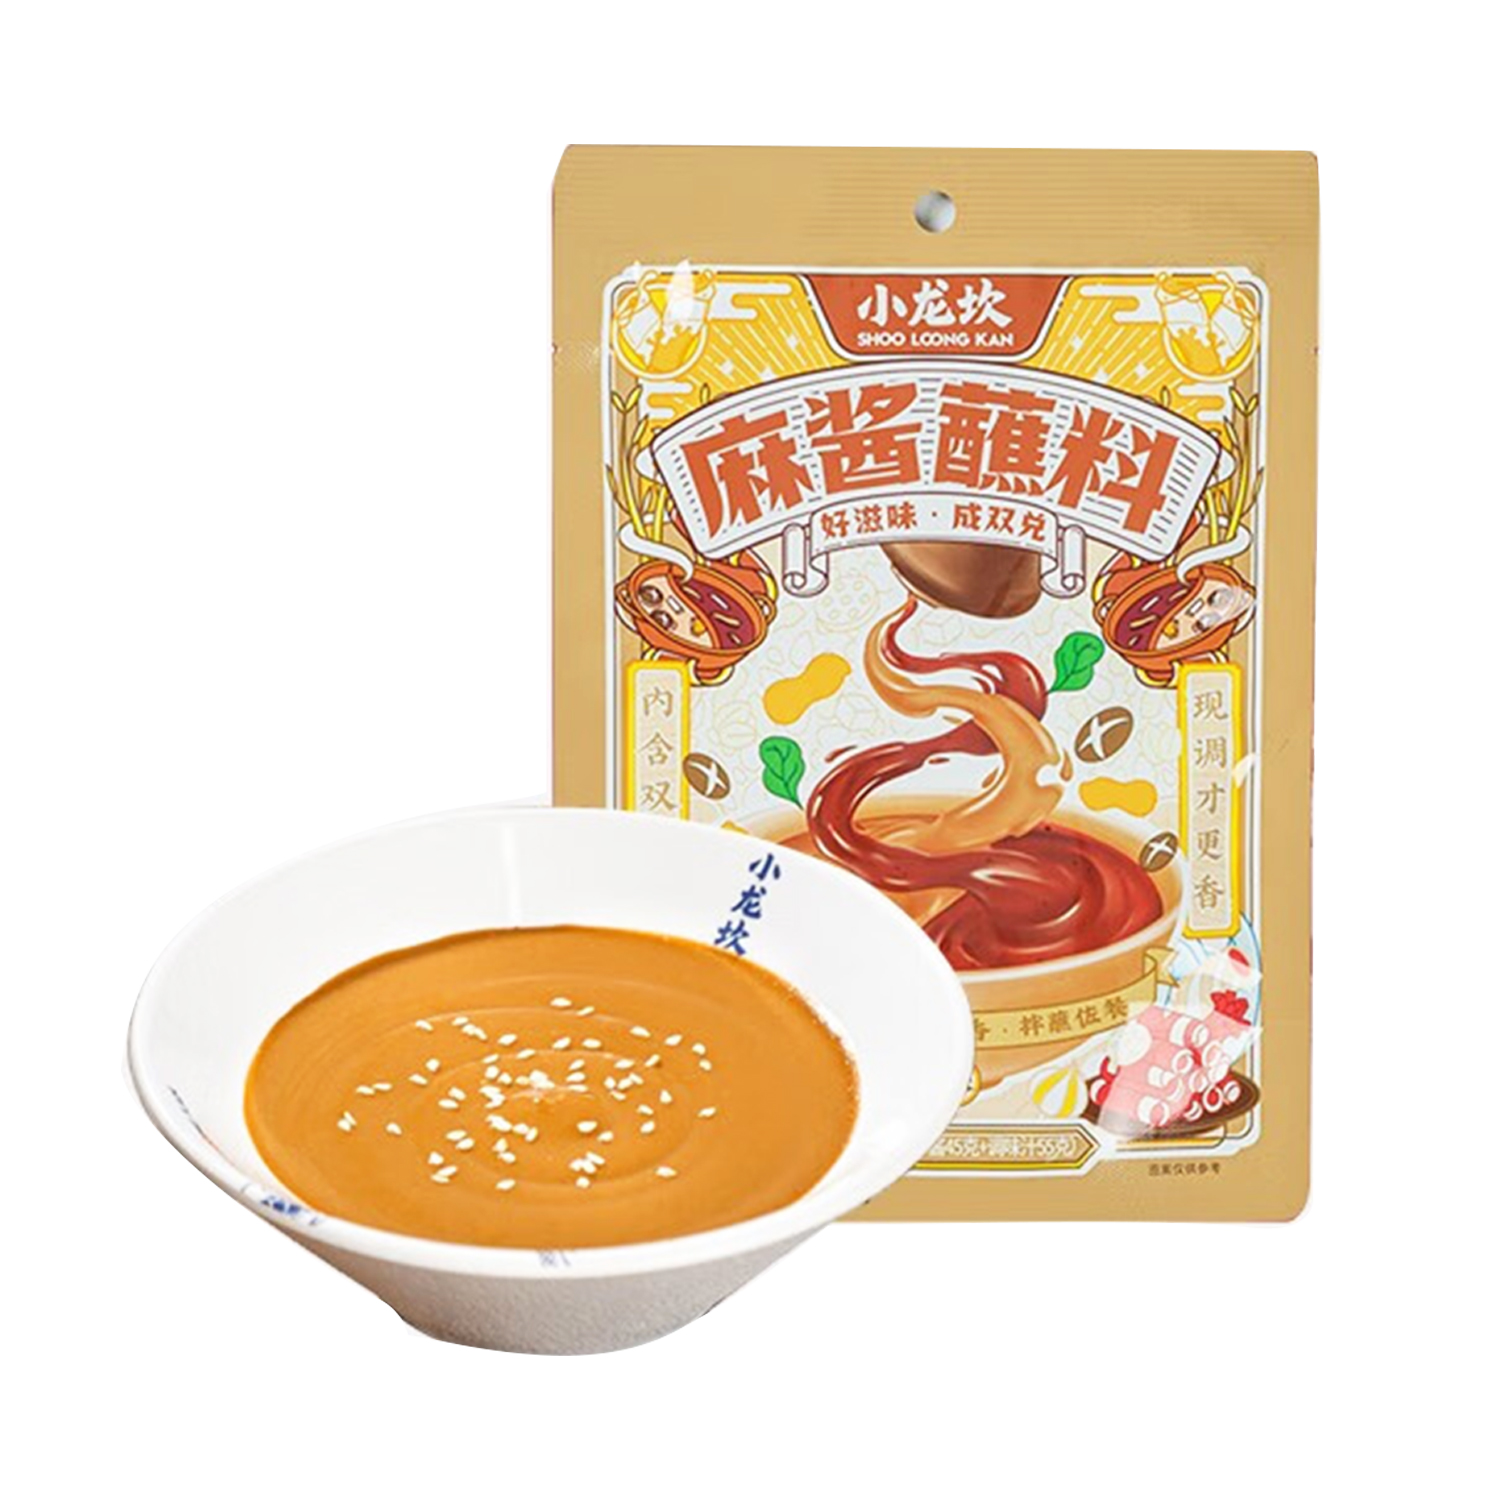 Shoo Loong Kan Original Flavour Sesame Paste Dipping Sauce 100g-eBest-Condiments,Pantry